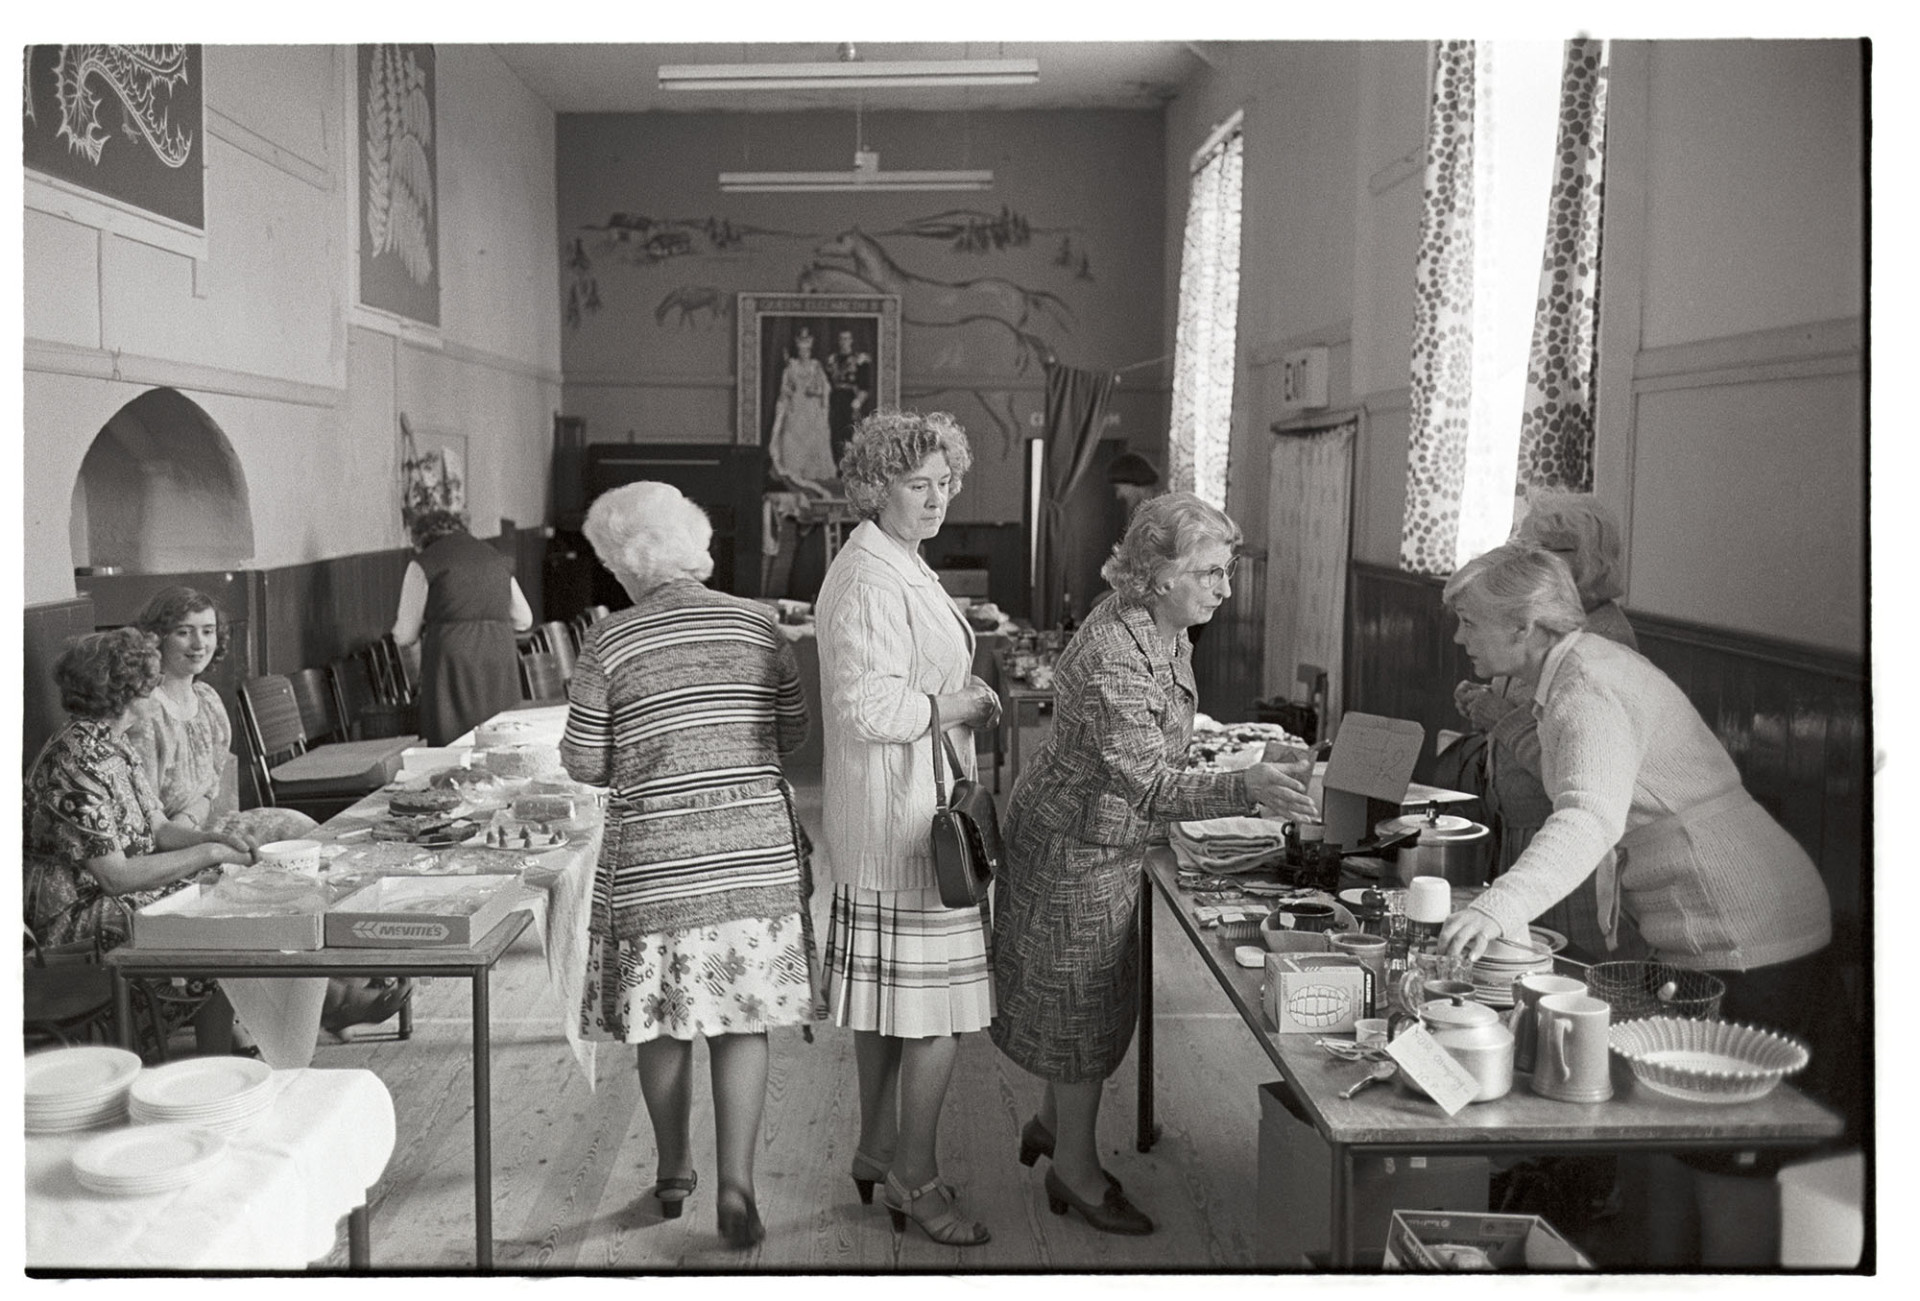 Stalls in village hall, women looking at cakes and produce. Dresses and cardigans. 
[Women looking at cake and bric-a-brac stalls at Roborough Fair in Roborough Village Hall. The walls are decorated with pictures, including a royal portrait at the far end of the hall.]